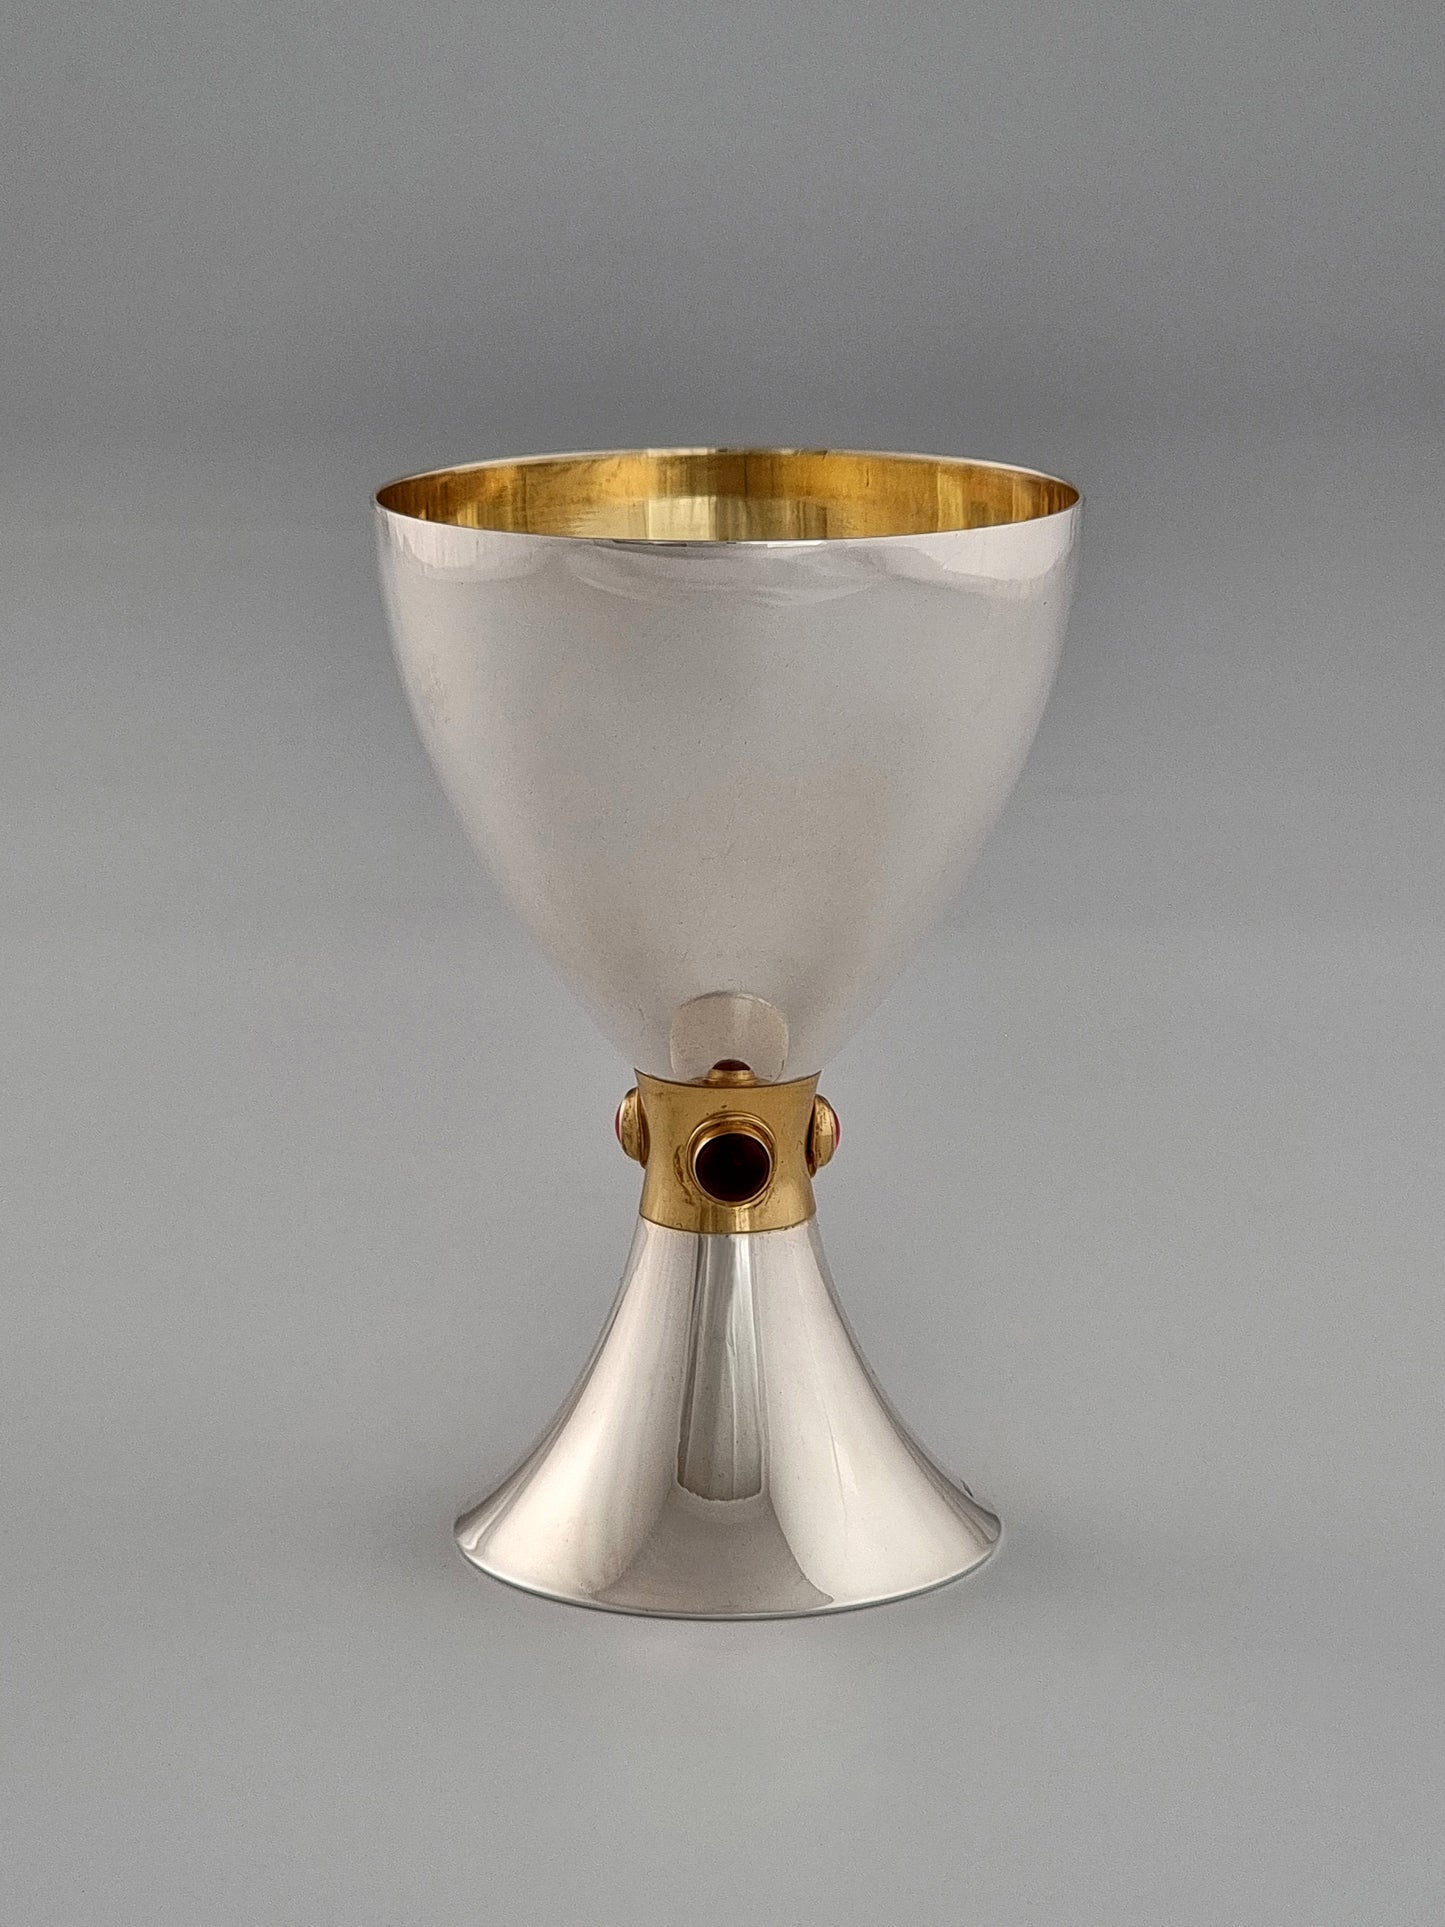 Deborah Kiddush Cup. This cup was designed in 1993. It is made of sterling silver, gold-plated silver on the inside, and adorned with three garnet stones. It measures 5" high.